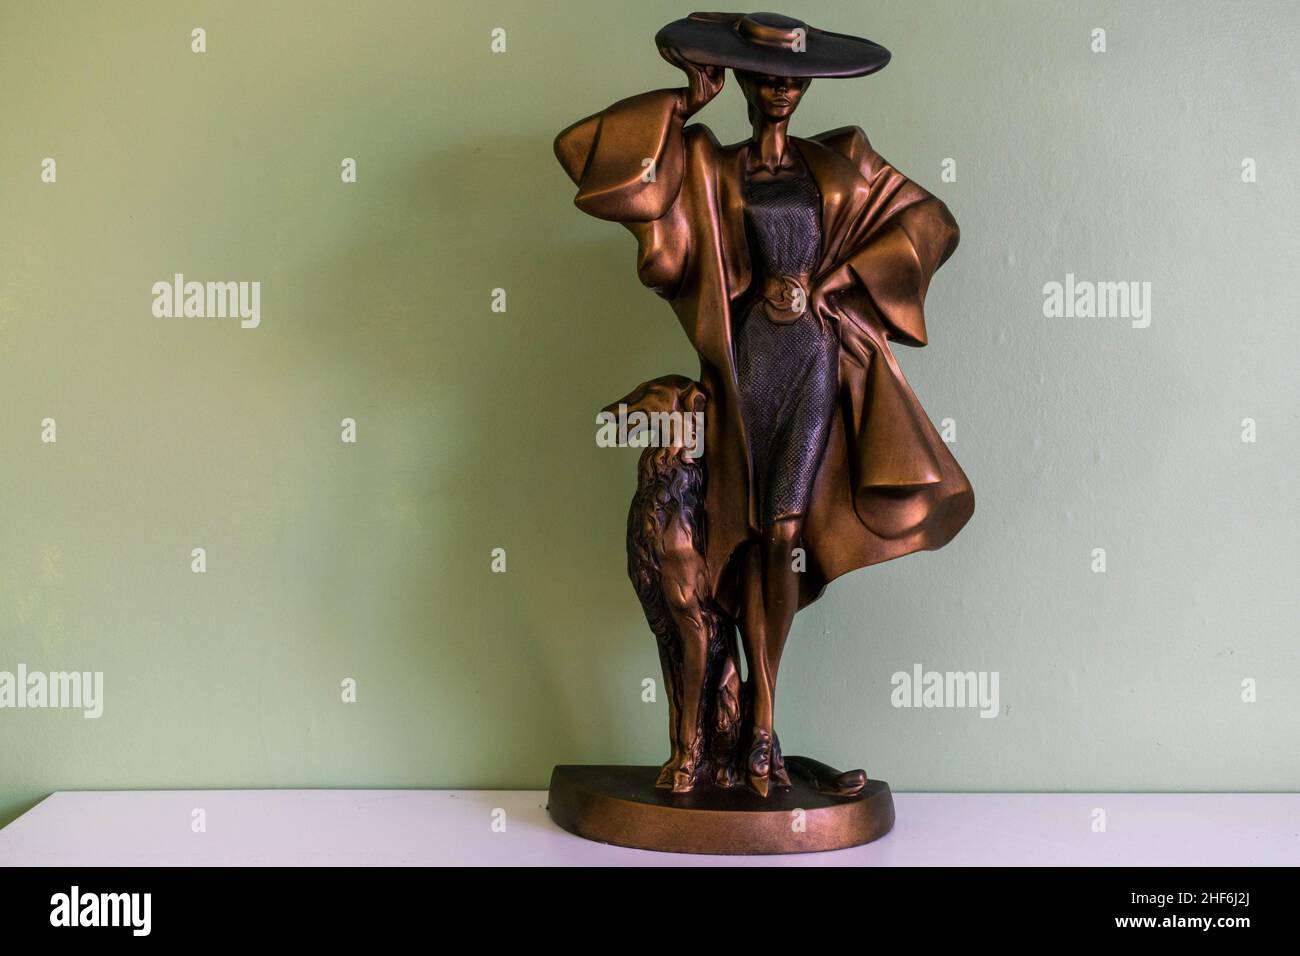 Hull, UK - 25th August 2019: Posh classy lady with large hat and dog home décor ornament. Unique bronze metal statue conceptualising modern vintage Stock Photo